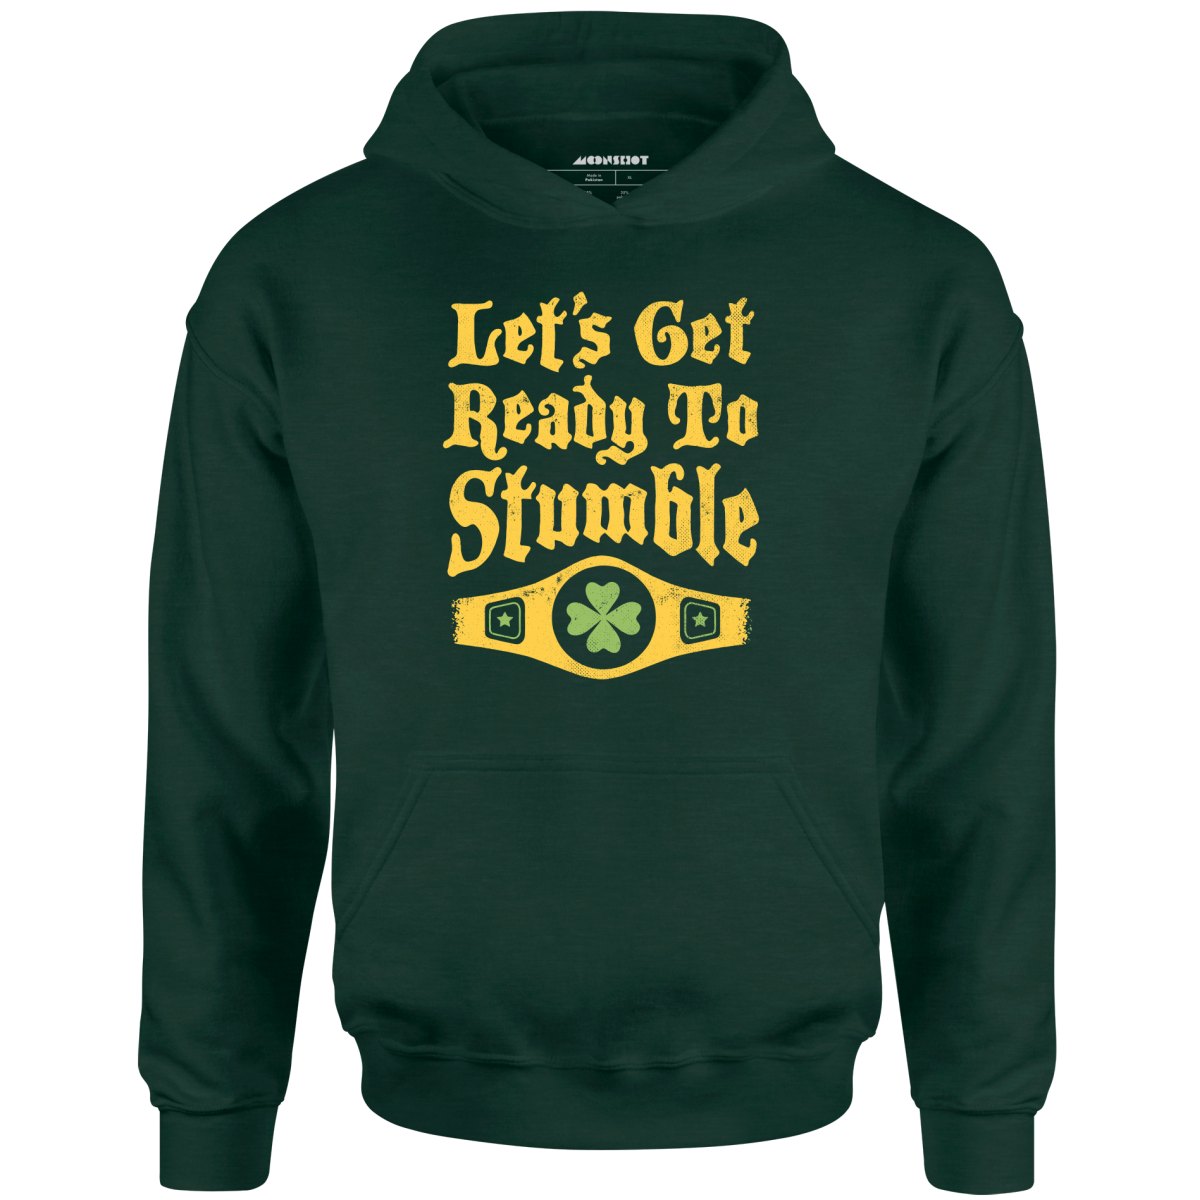 Let's Get Ready to Stumble - Unisex Hoodie